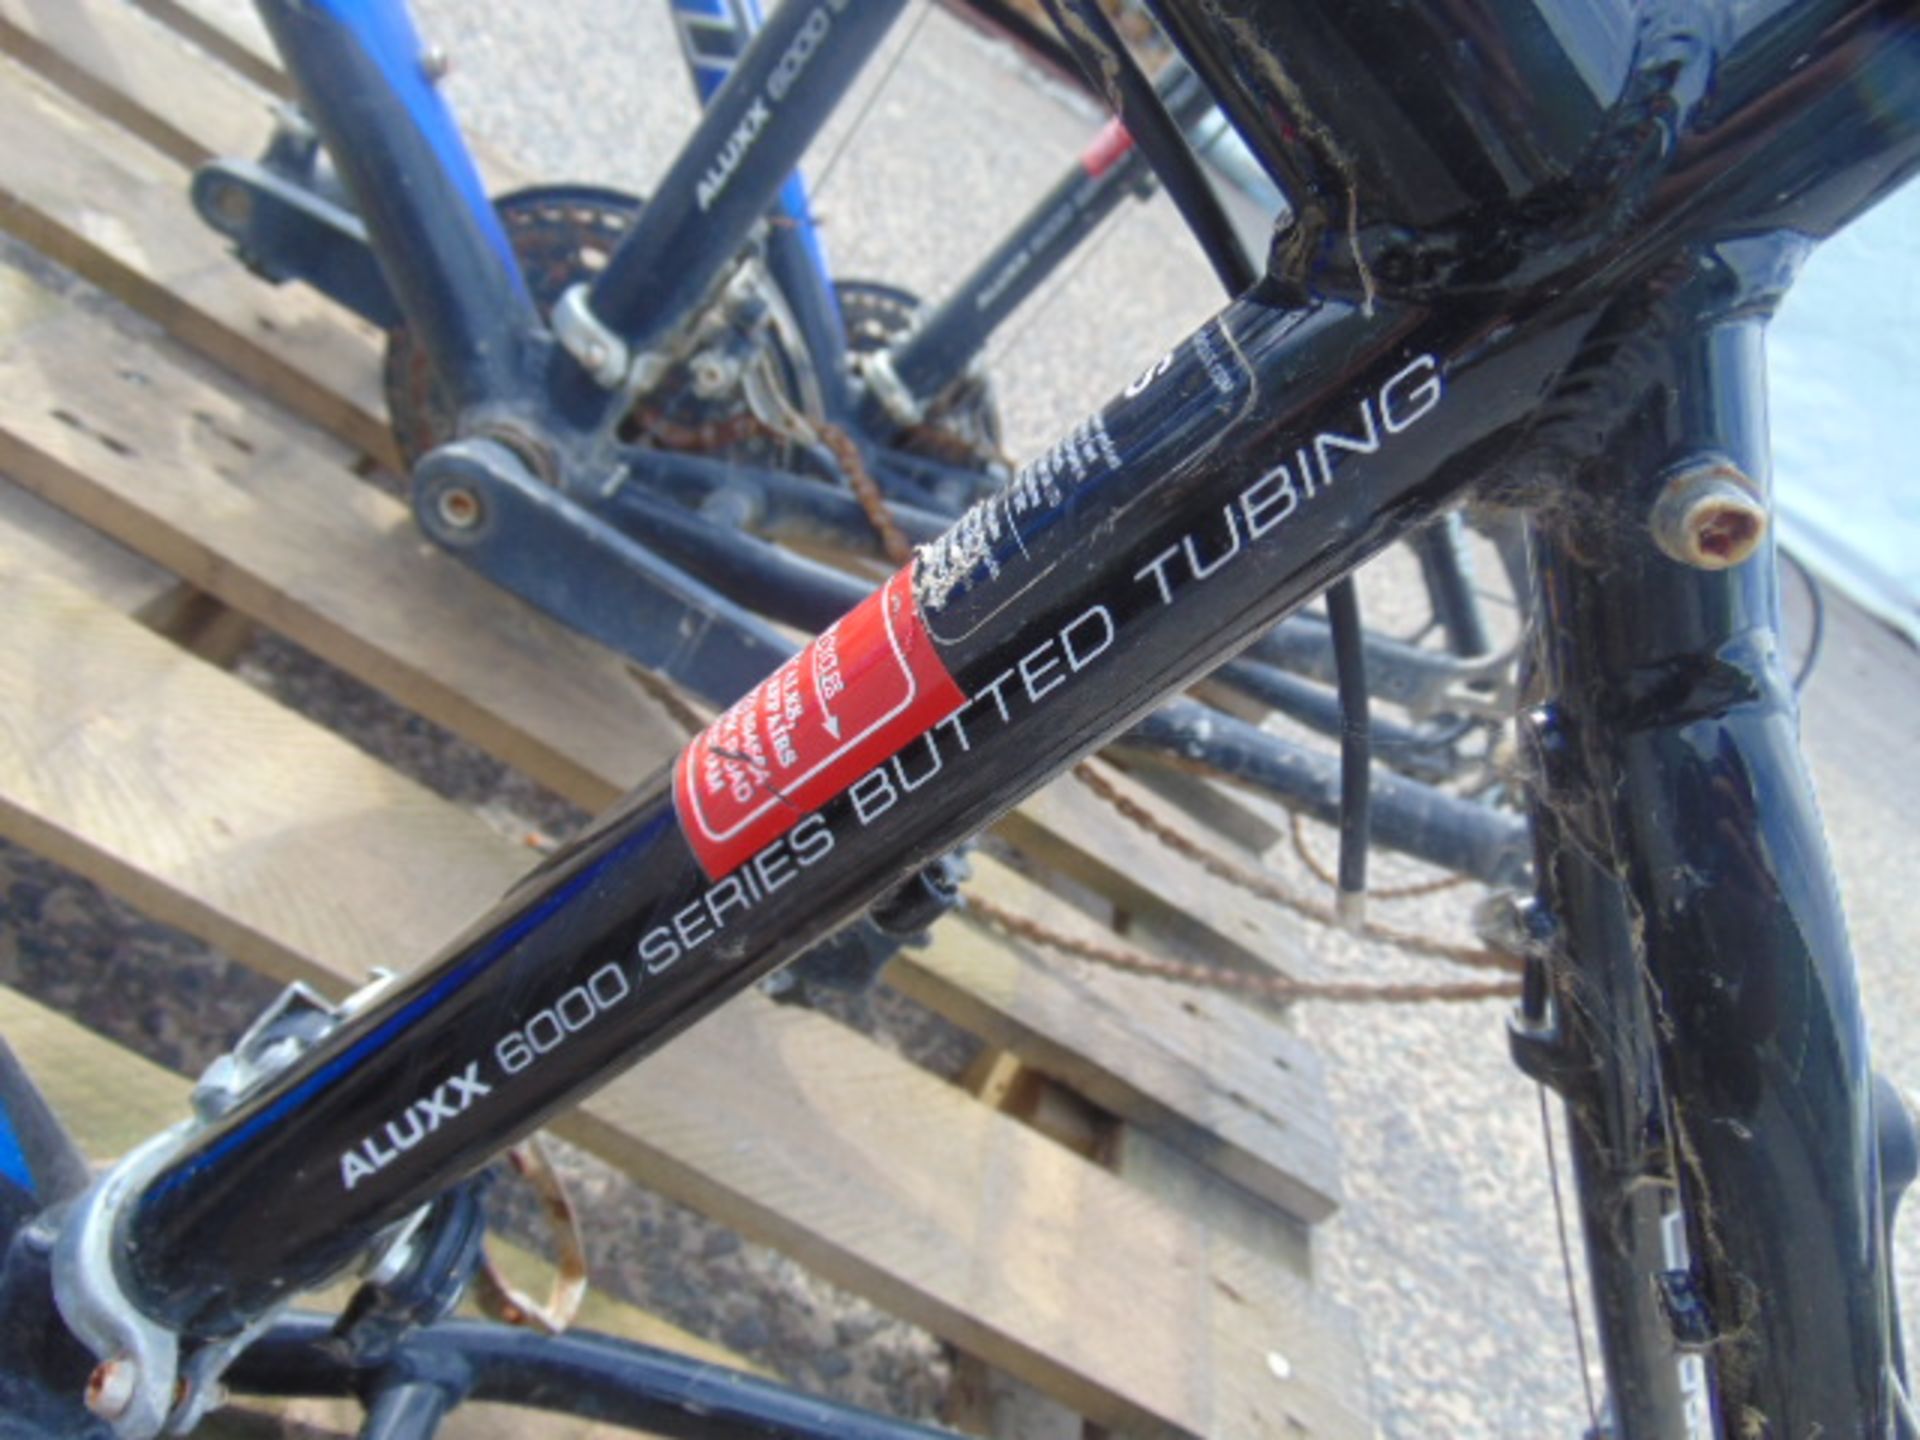 3 x Giant Alluxx 6000 Series Bike Frames with Forks, 2 x wheels etc - Image 8 of 9